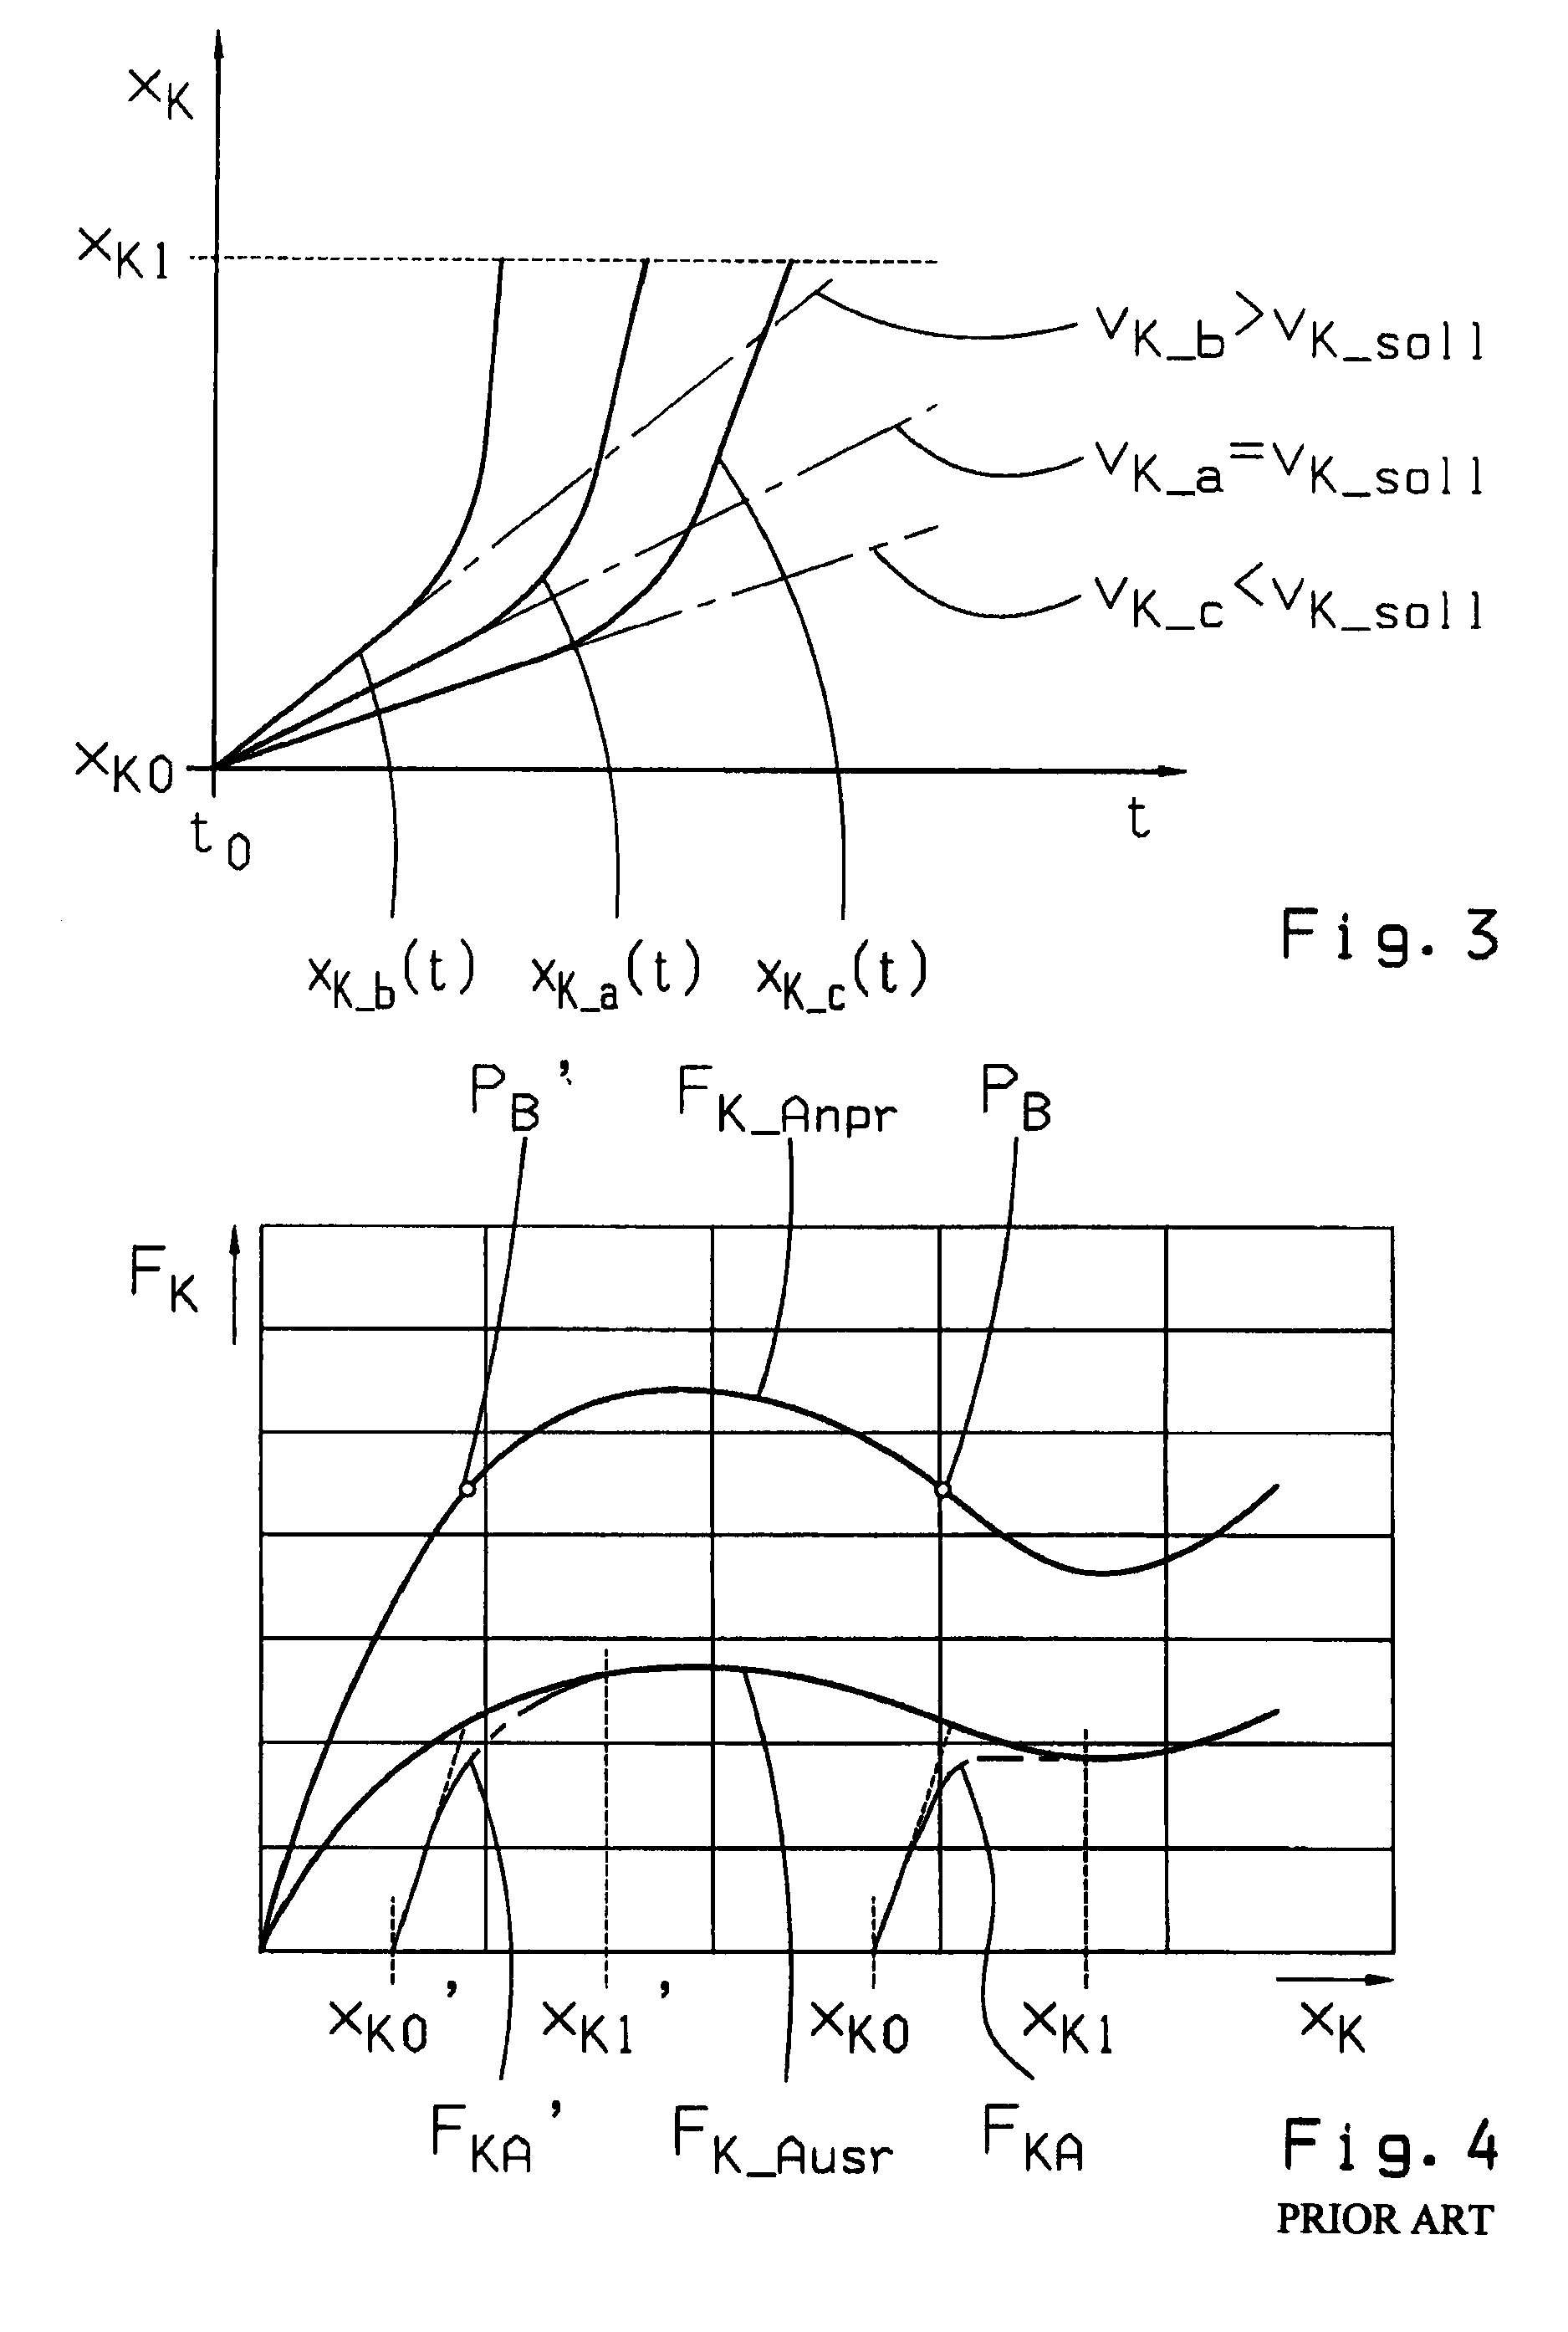 Method for controlling an automated friction clutch